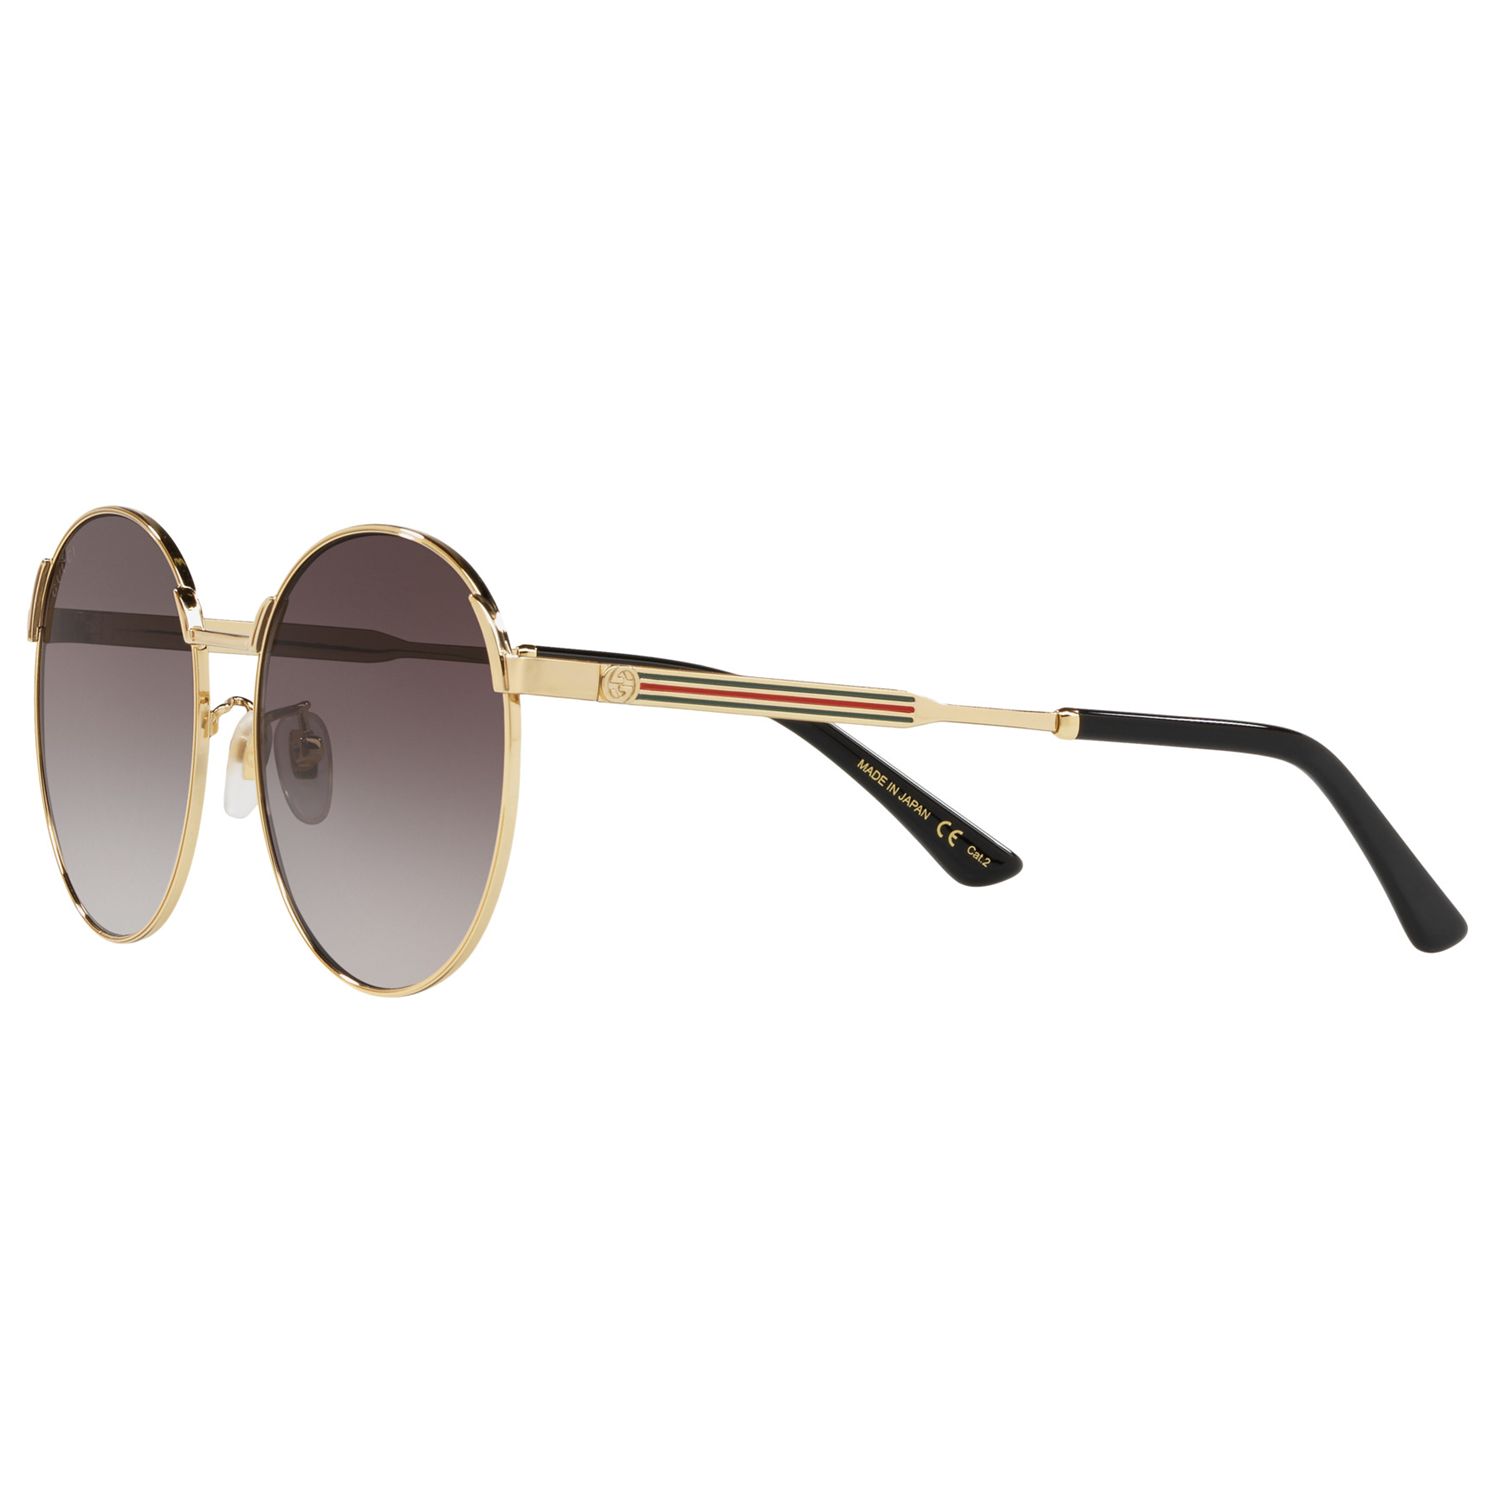 Gucci GG0206SK Oval Sunglasses, Gold/Grey Gradient at John Lewis & Partners